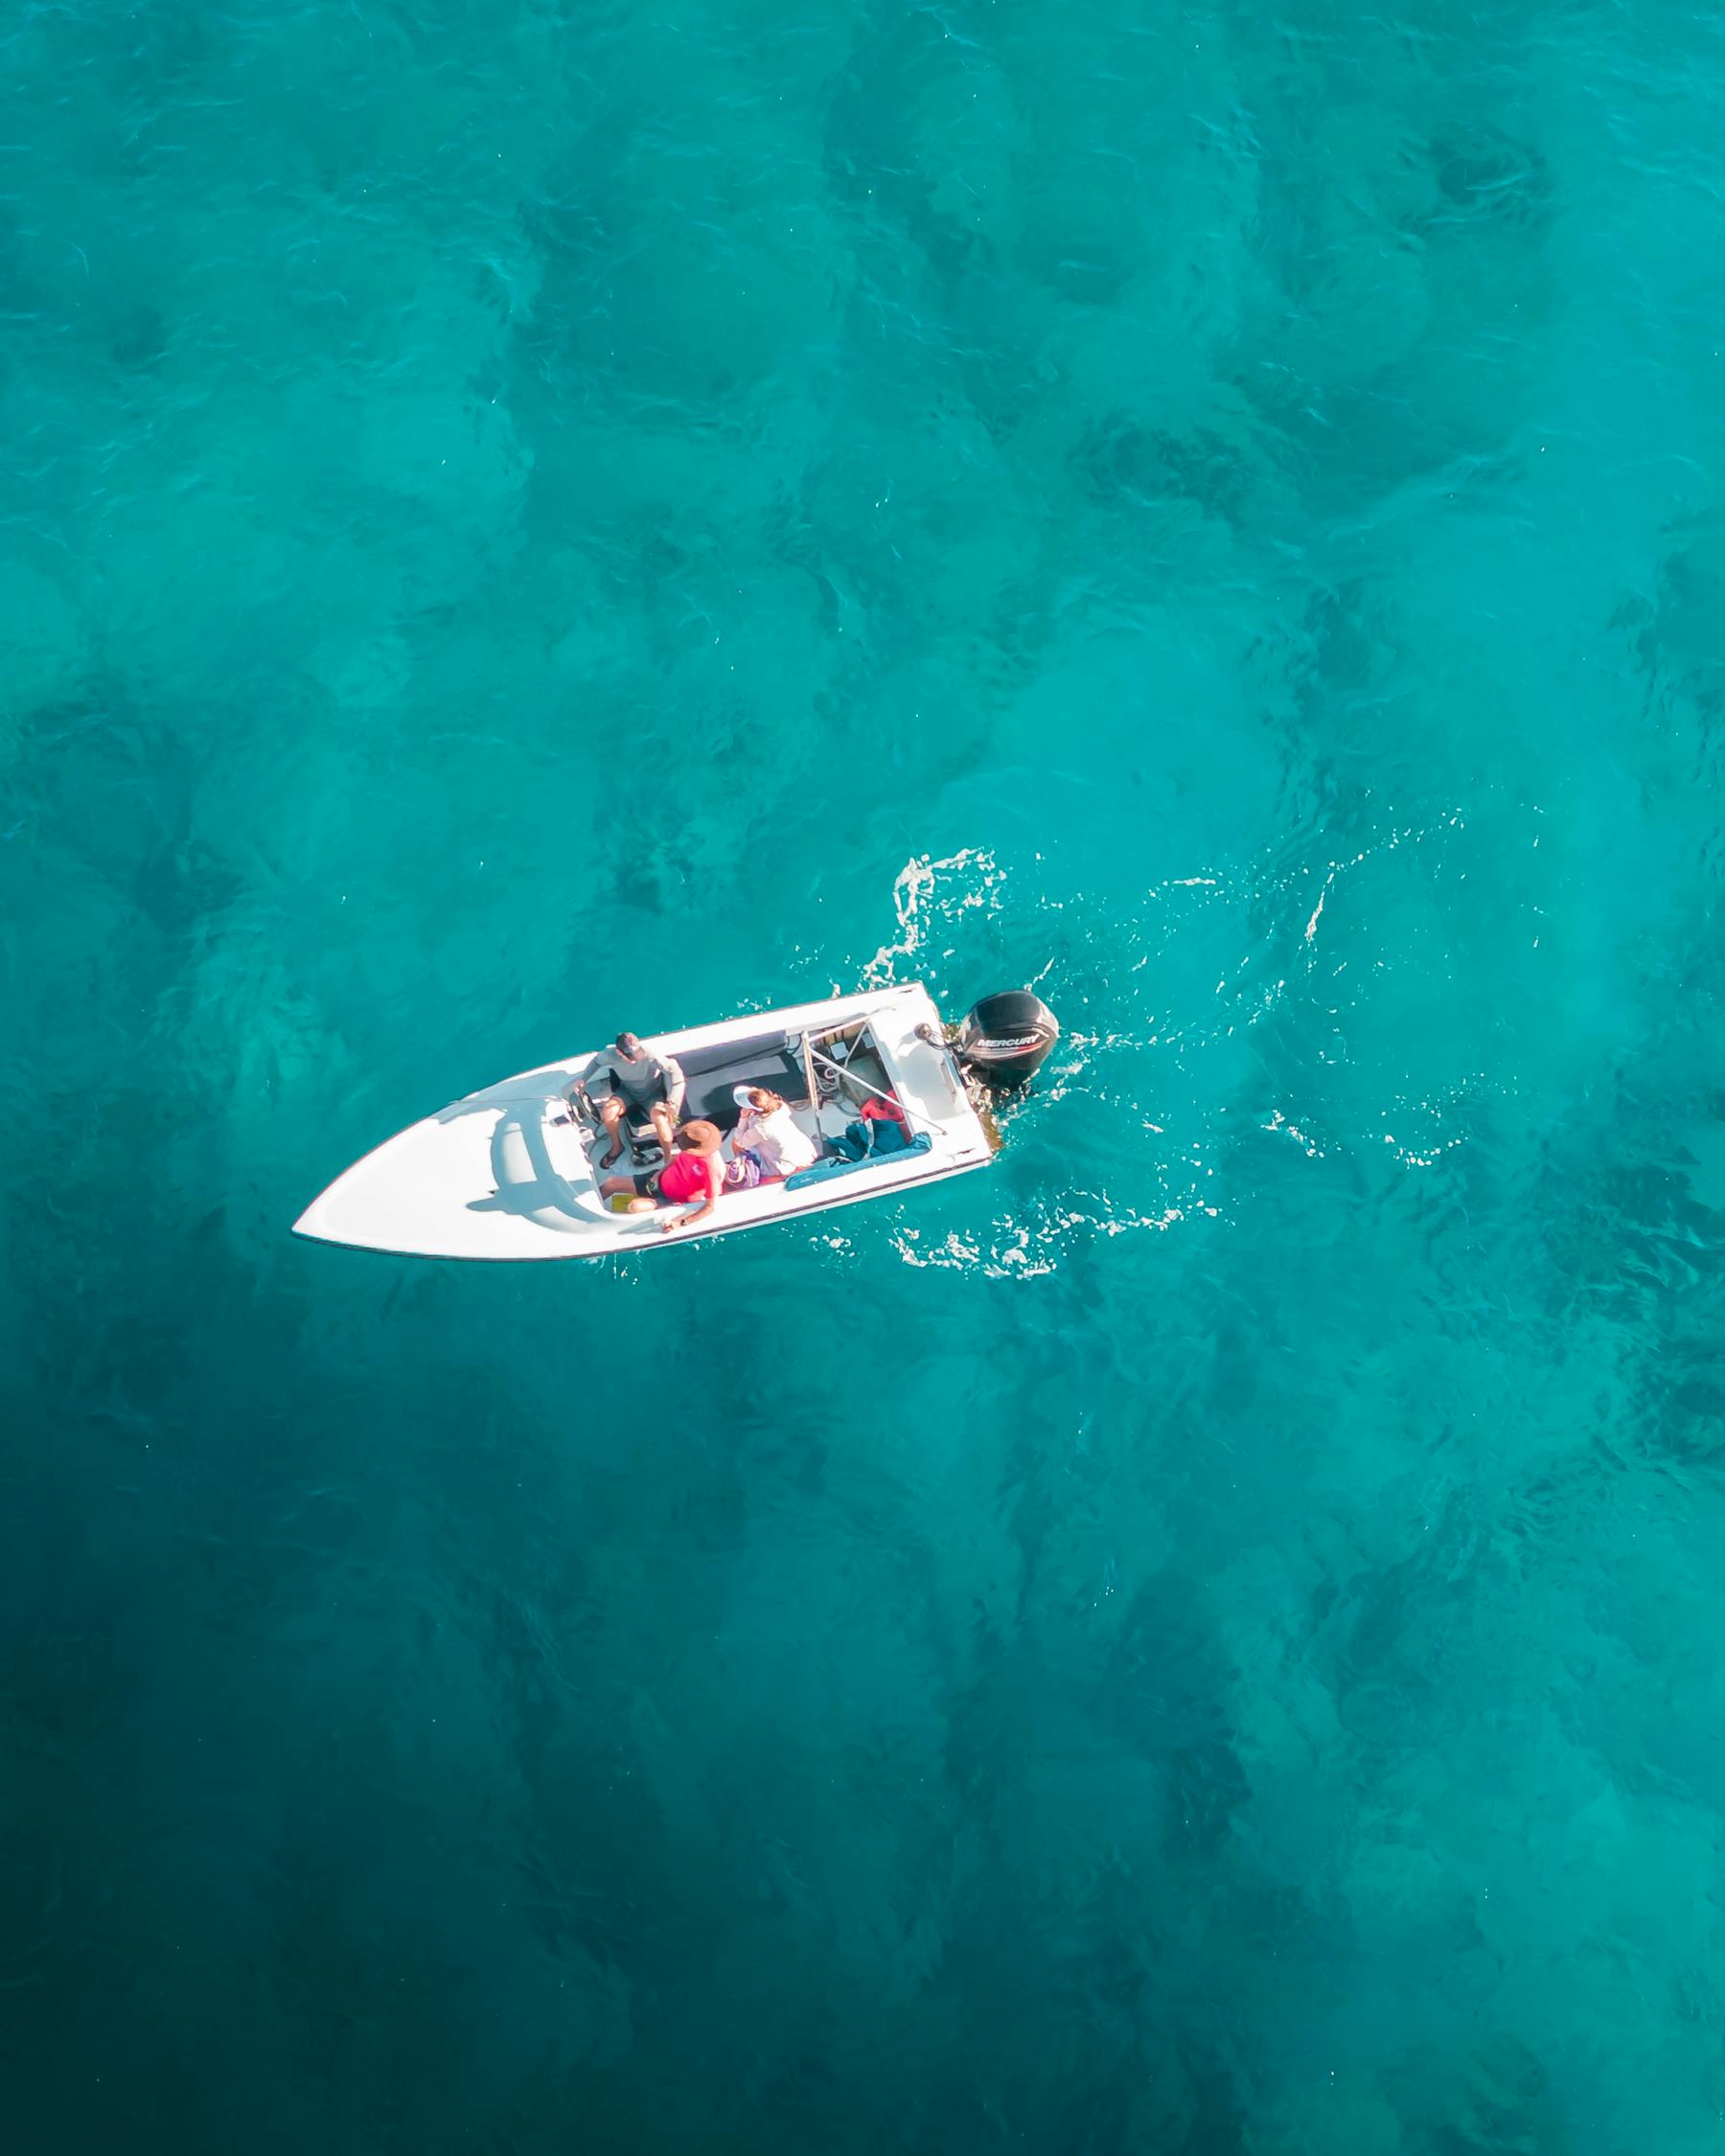 People in a Boat on Blue Waters